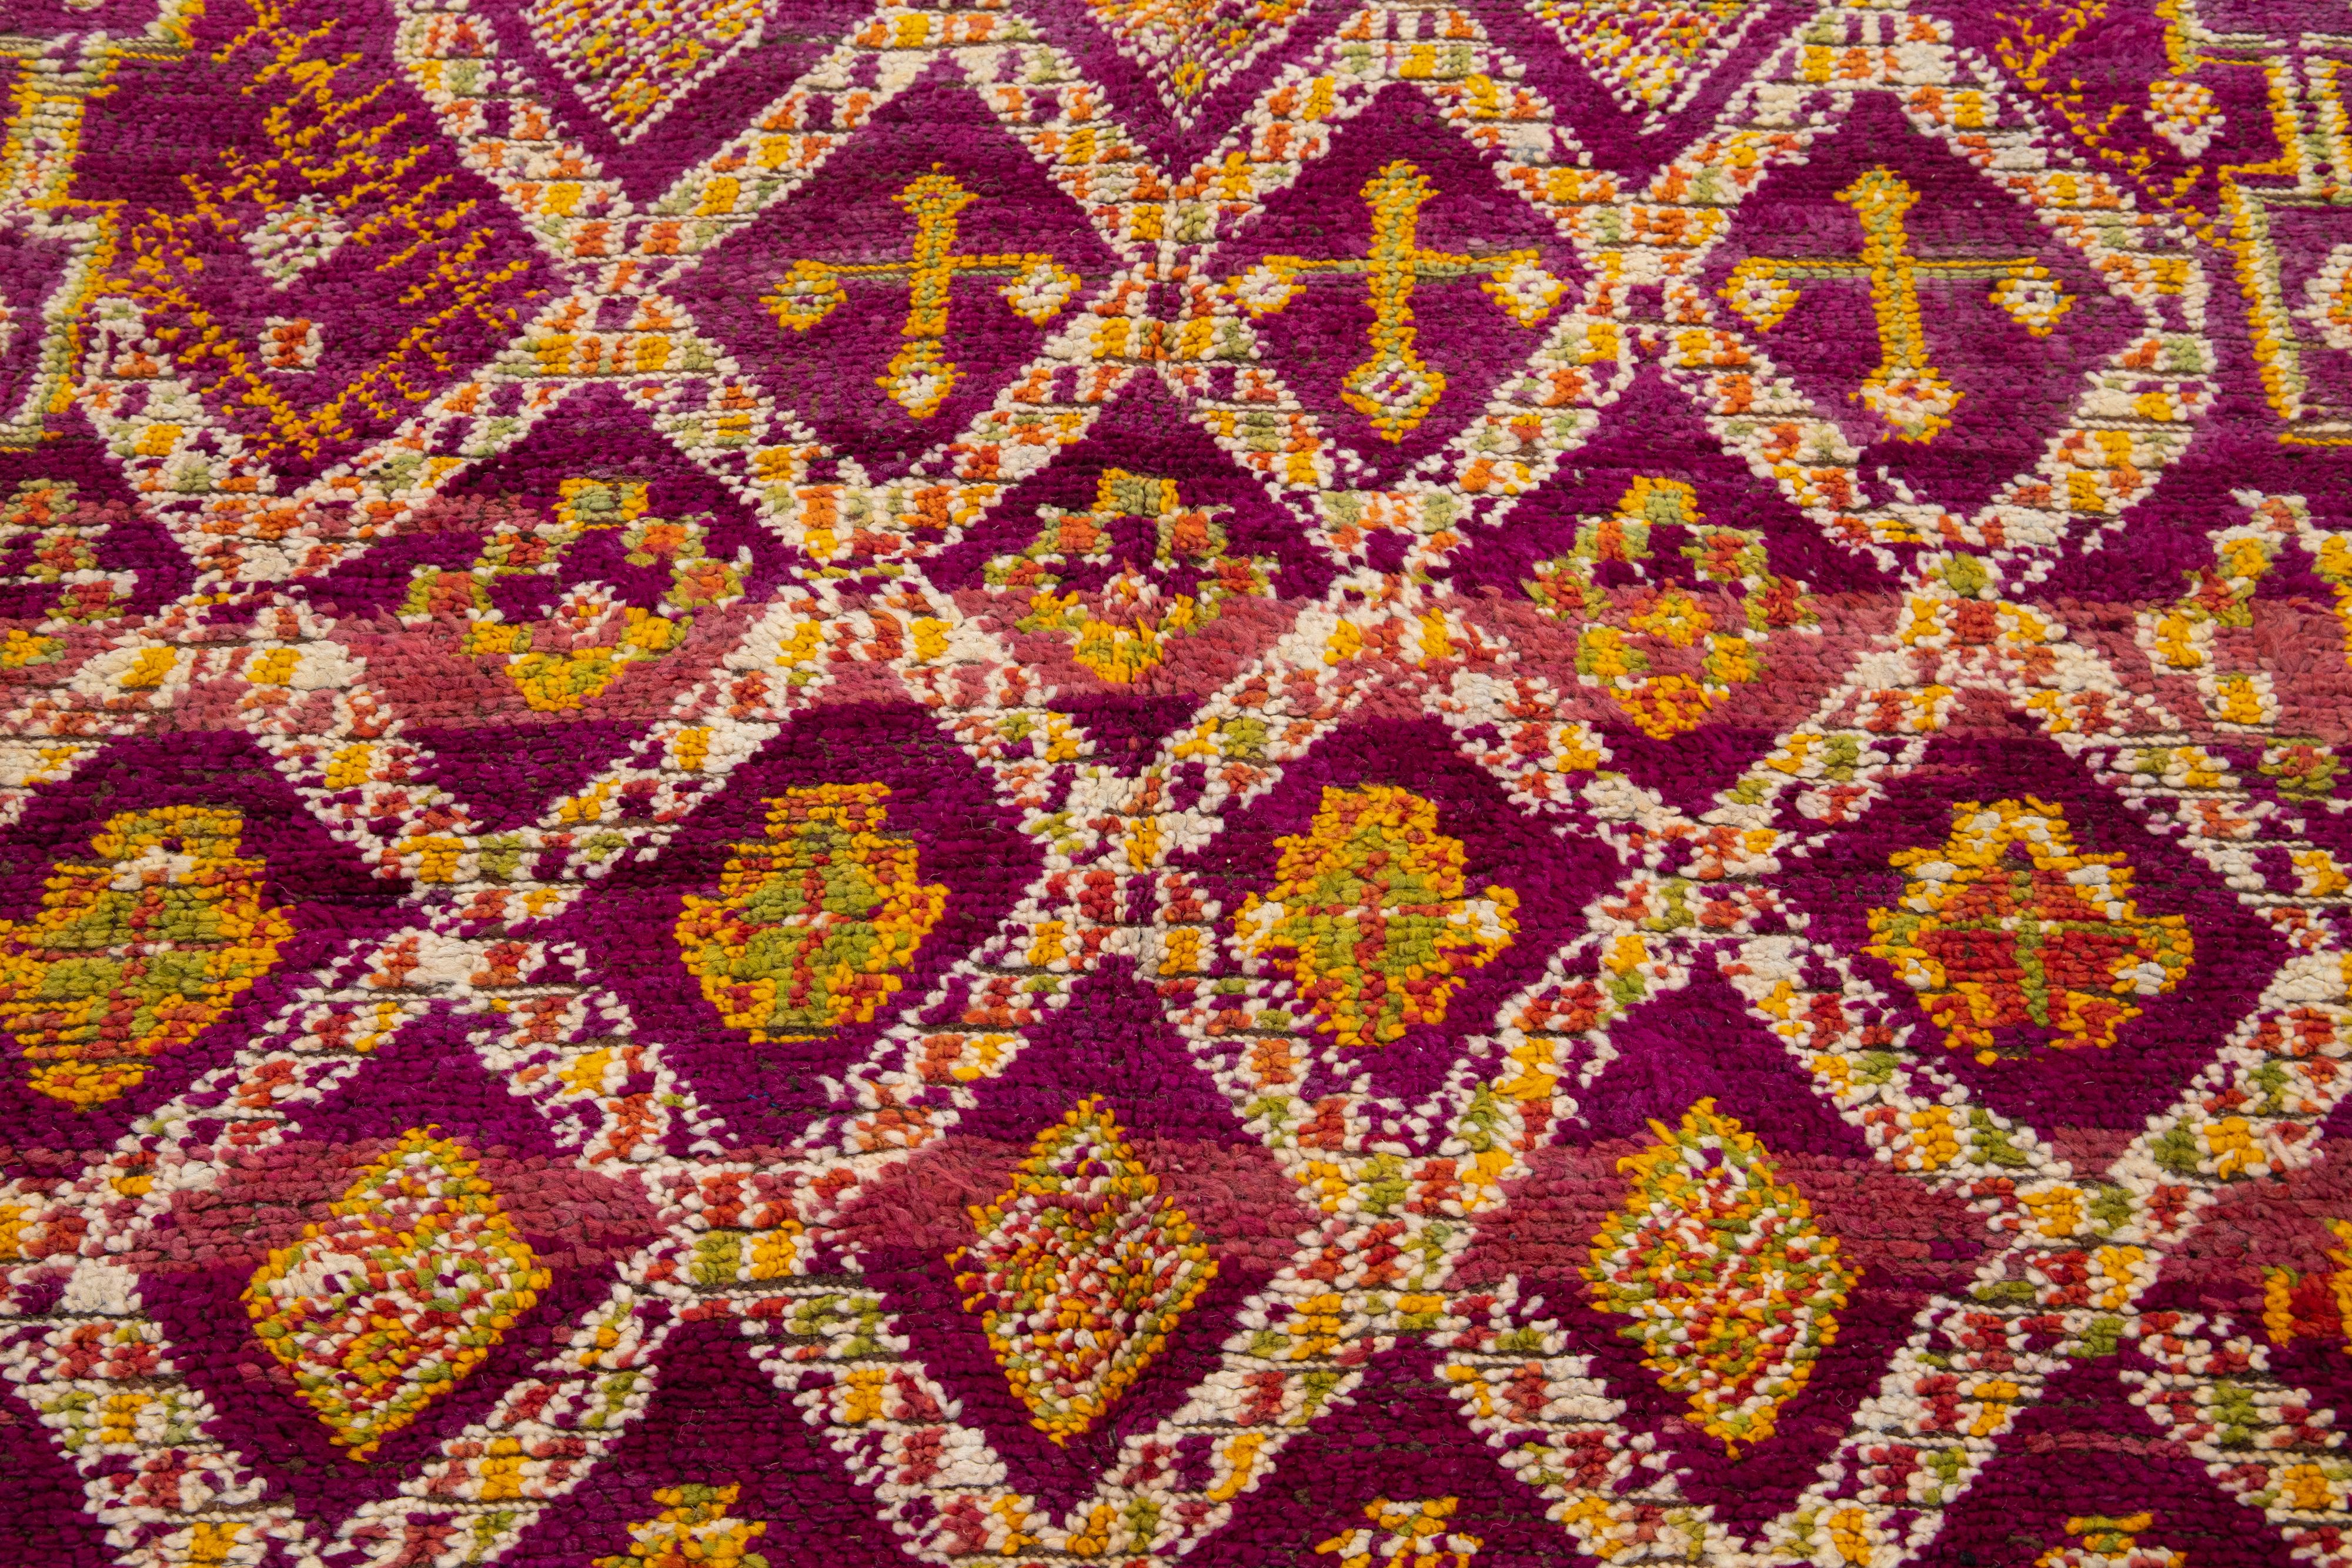 Mid-20th Century Vintage Tribal Moroccan Wool Rug In Purple  For Sale 3